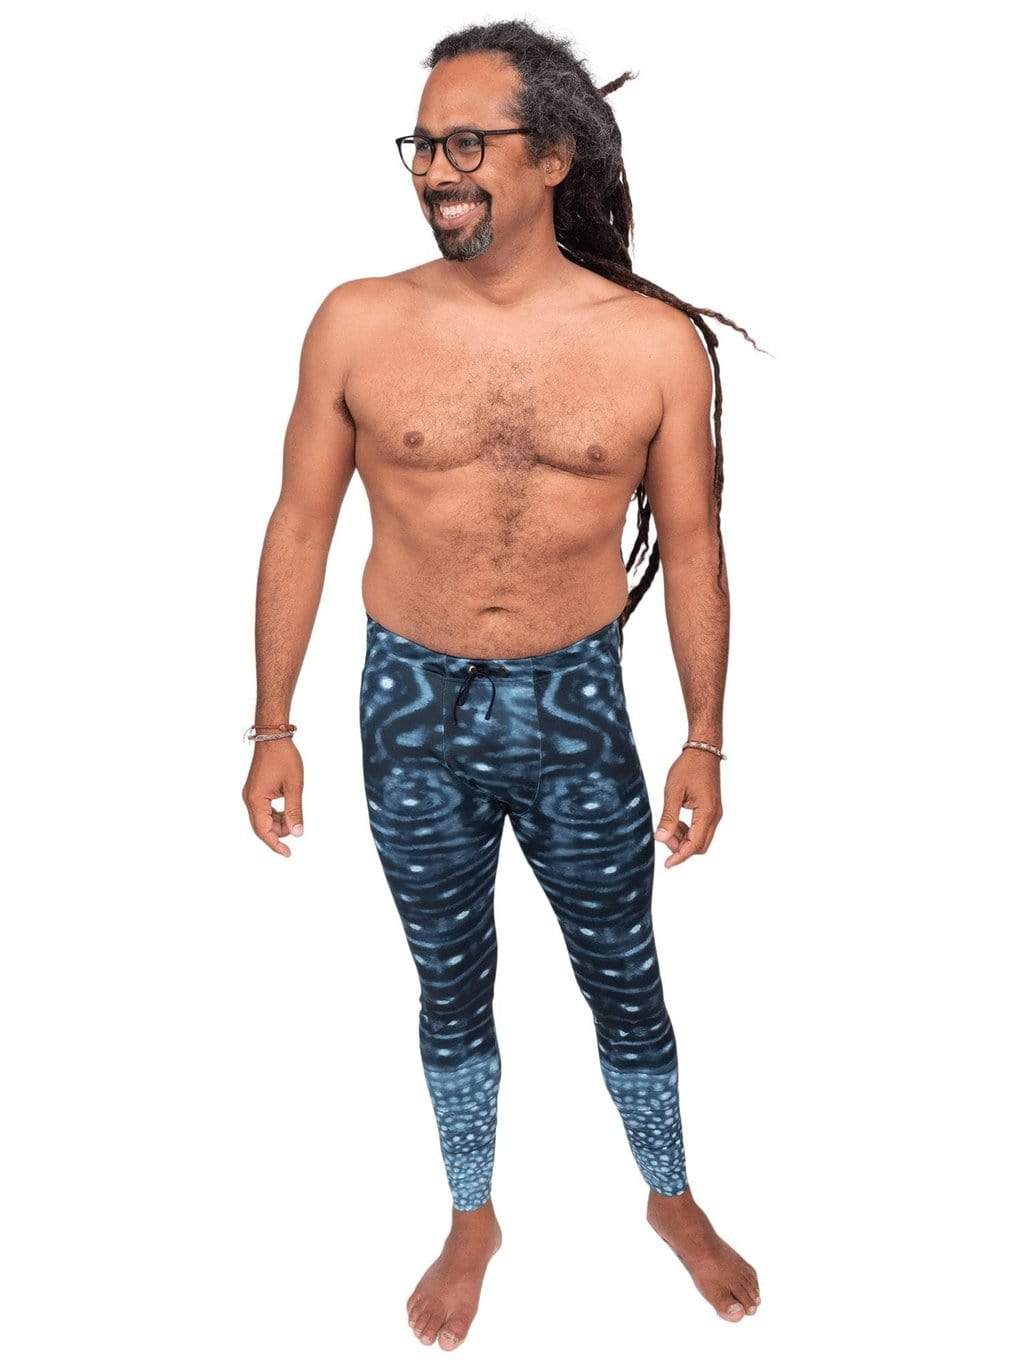 Model: Rolando is a seascape and fisheries ecologist. He is 5&#39;9, 190 lbs and is wearing a size L.